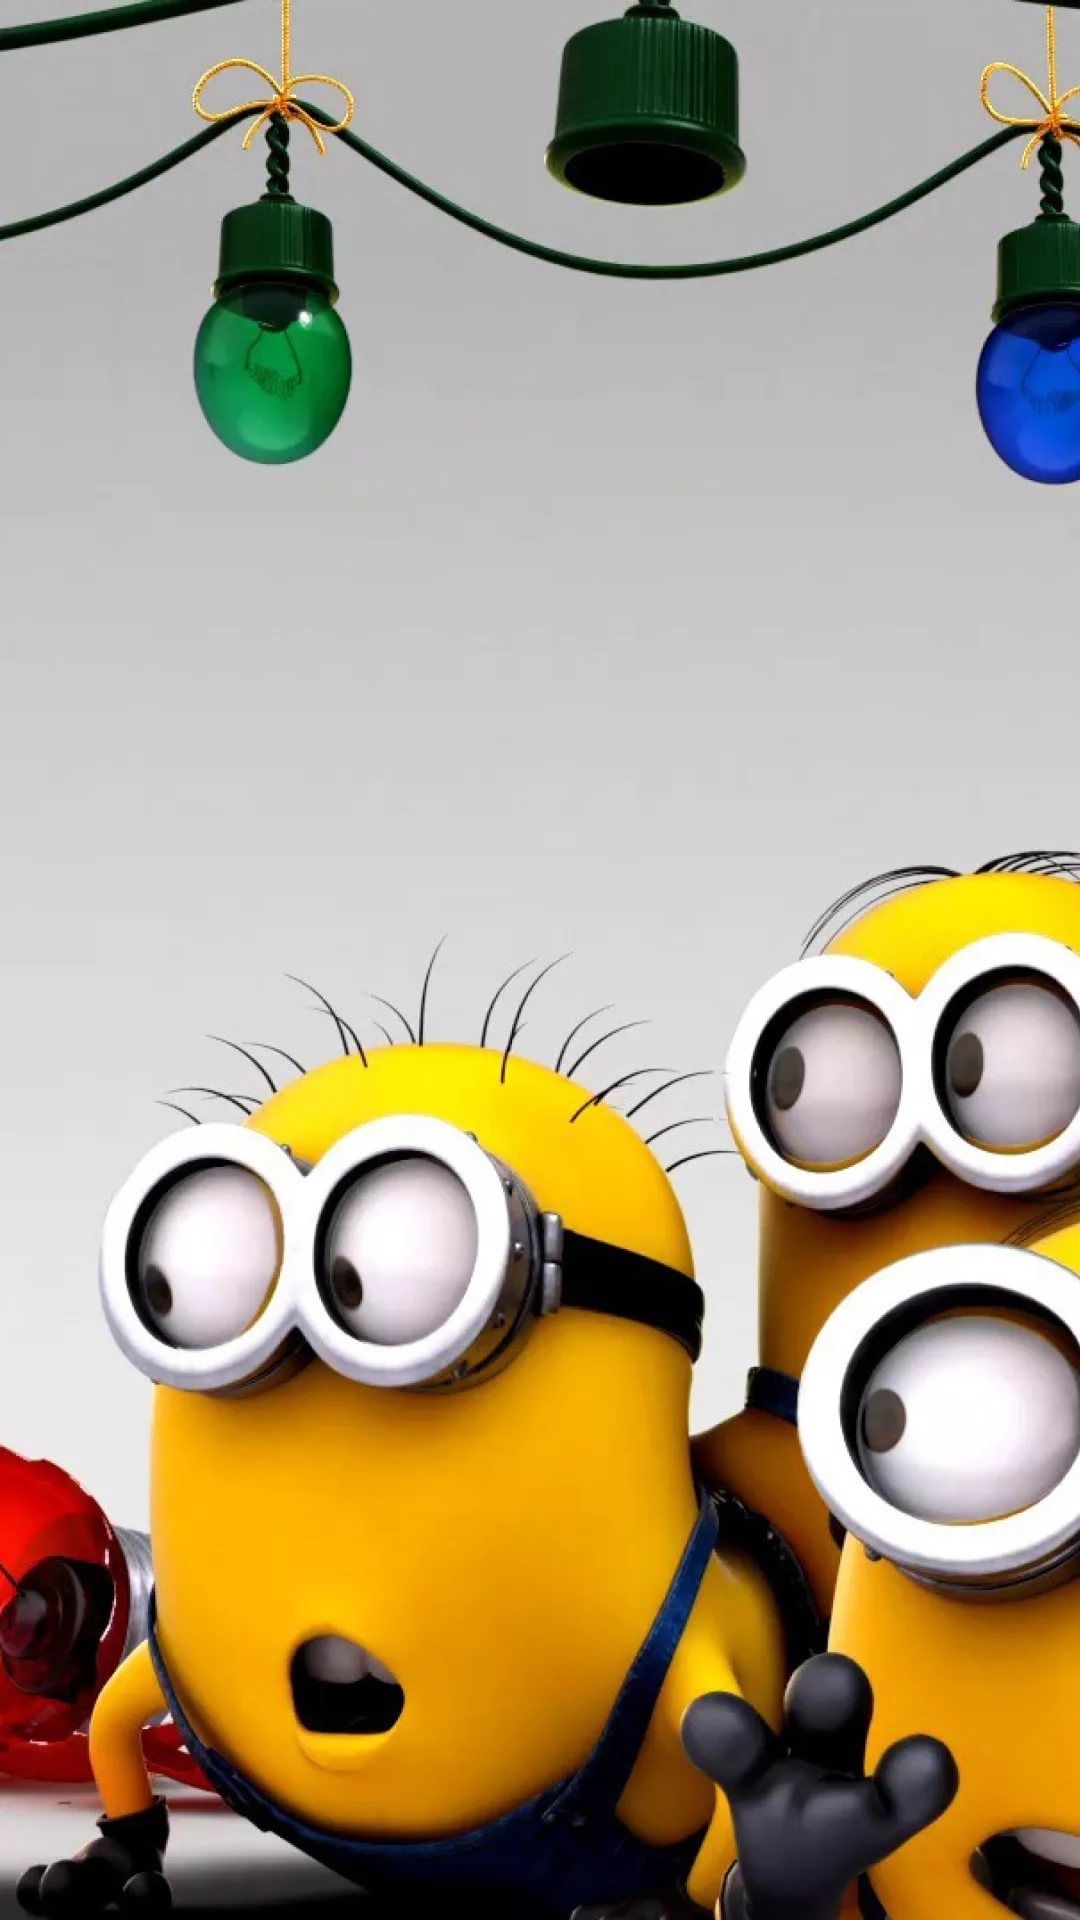 Minion wallpaper for iPhone